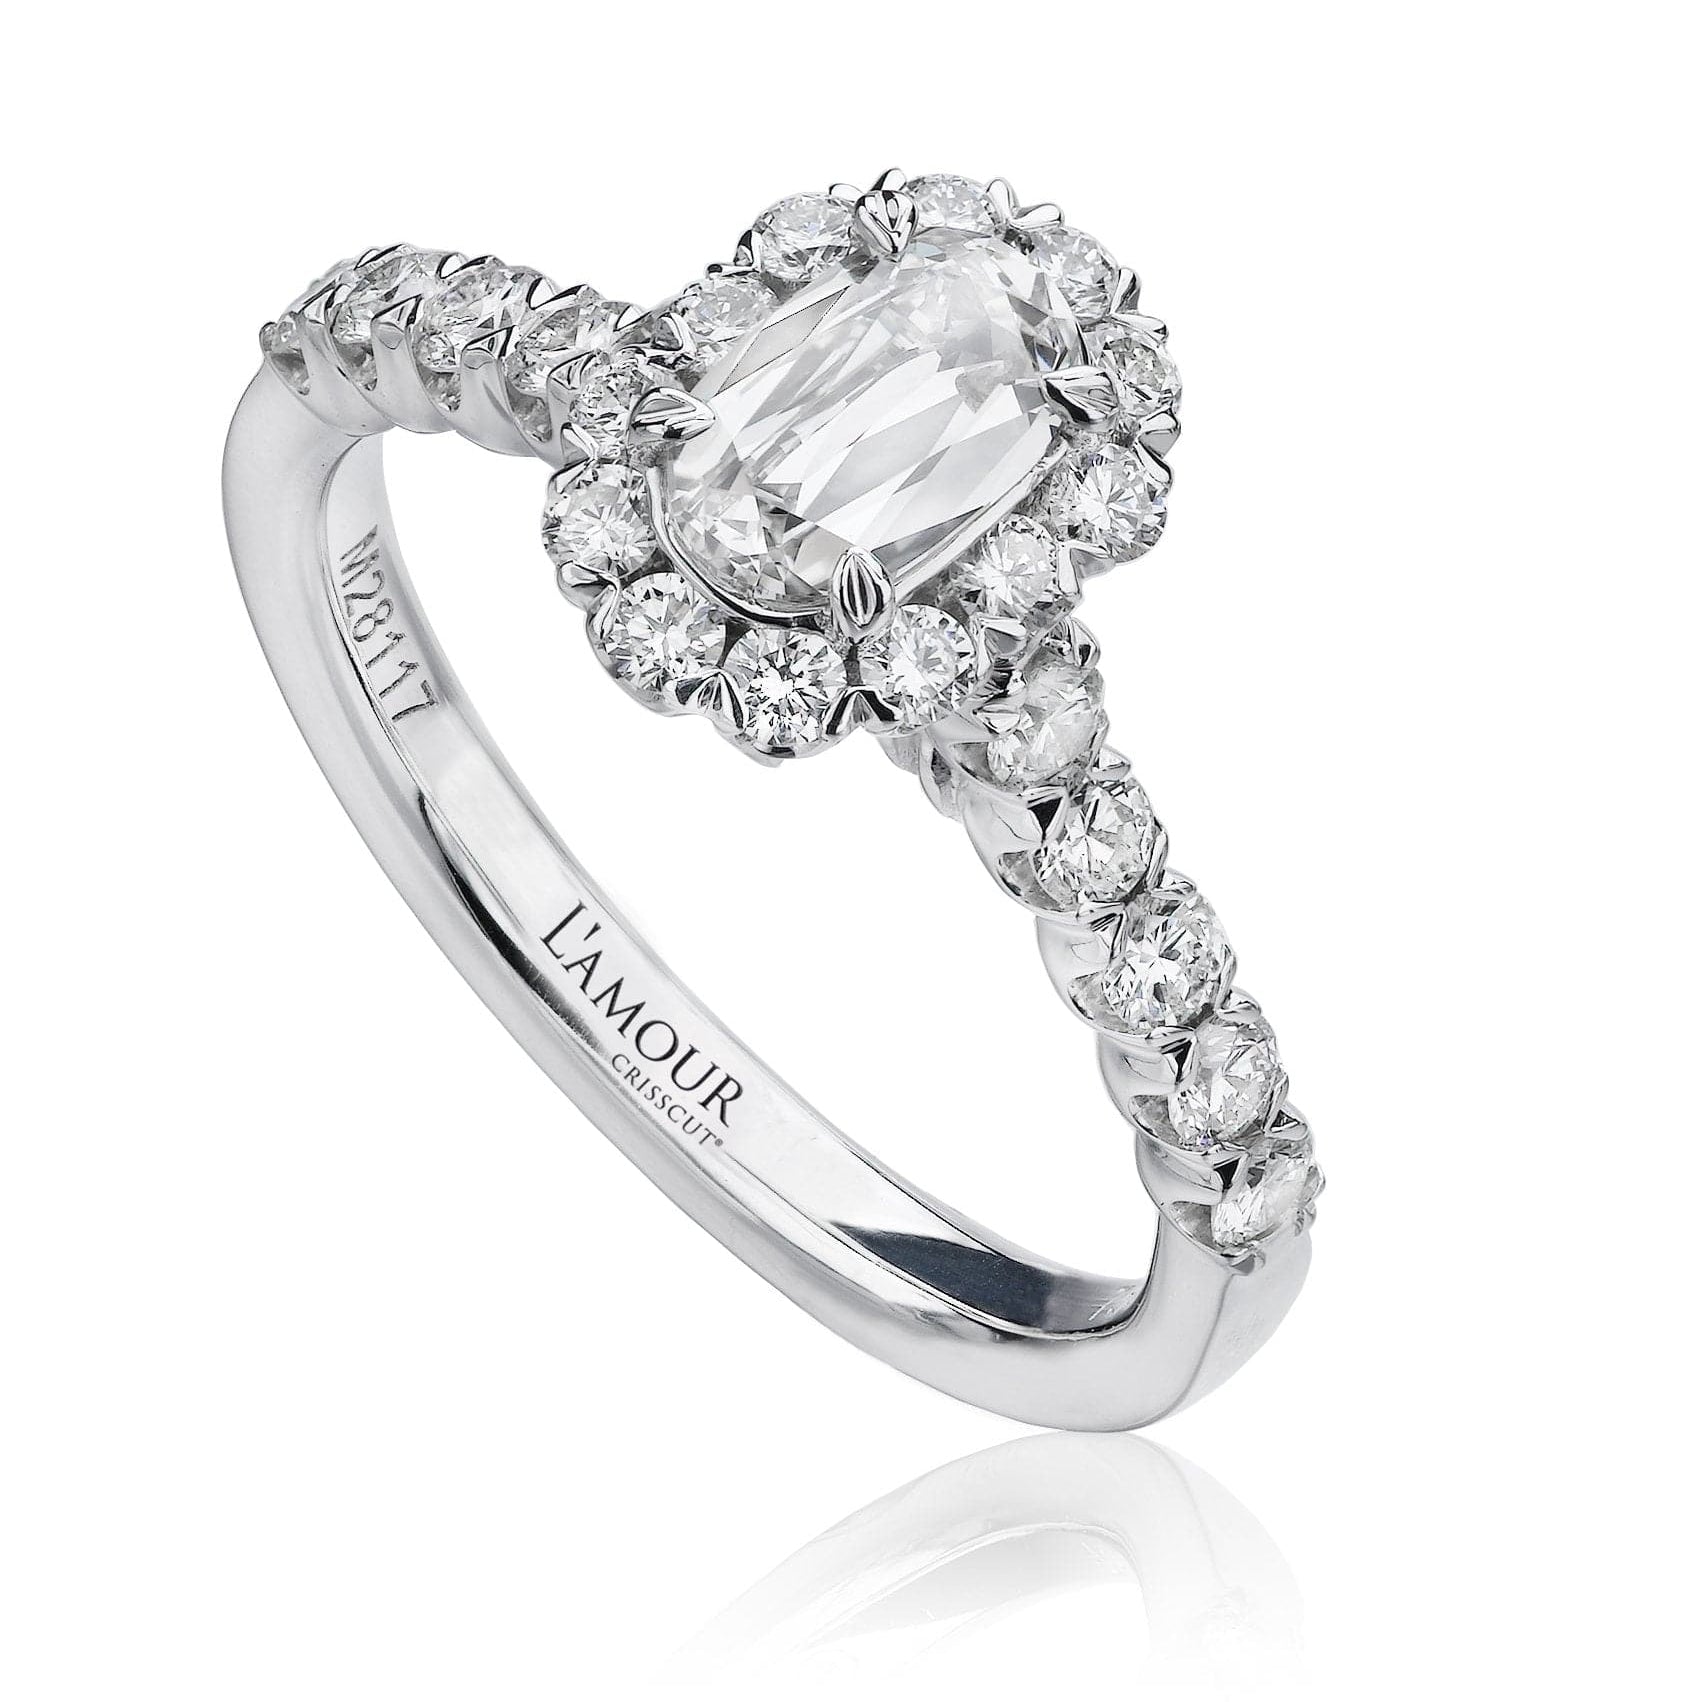 Christopher Designs Bridal Engagement Ring 18K White Gold L'Amour Crisscut Oval .51ct Halo Engagement Ring 6.5